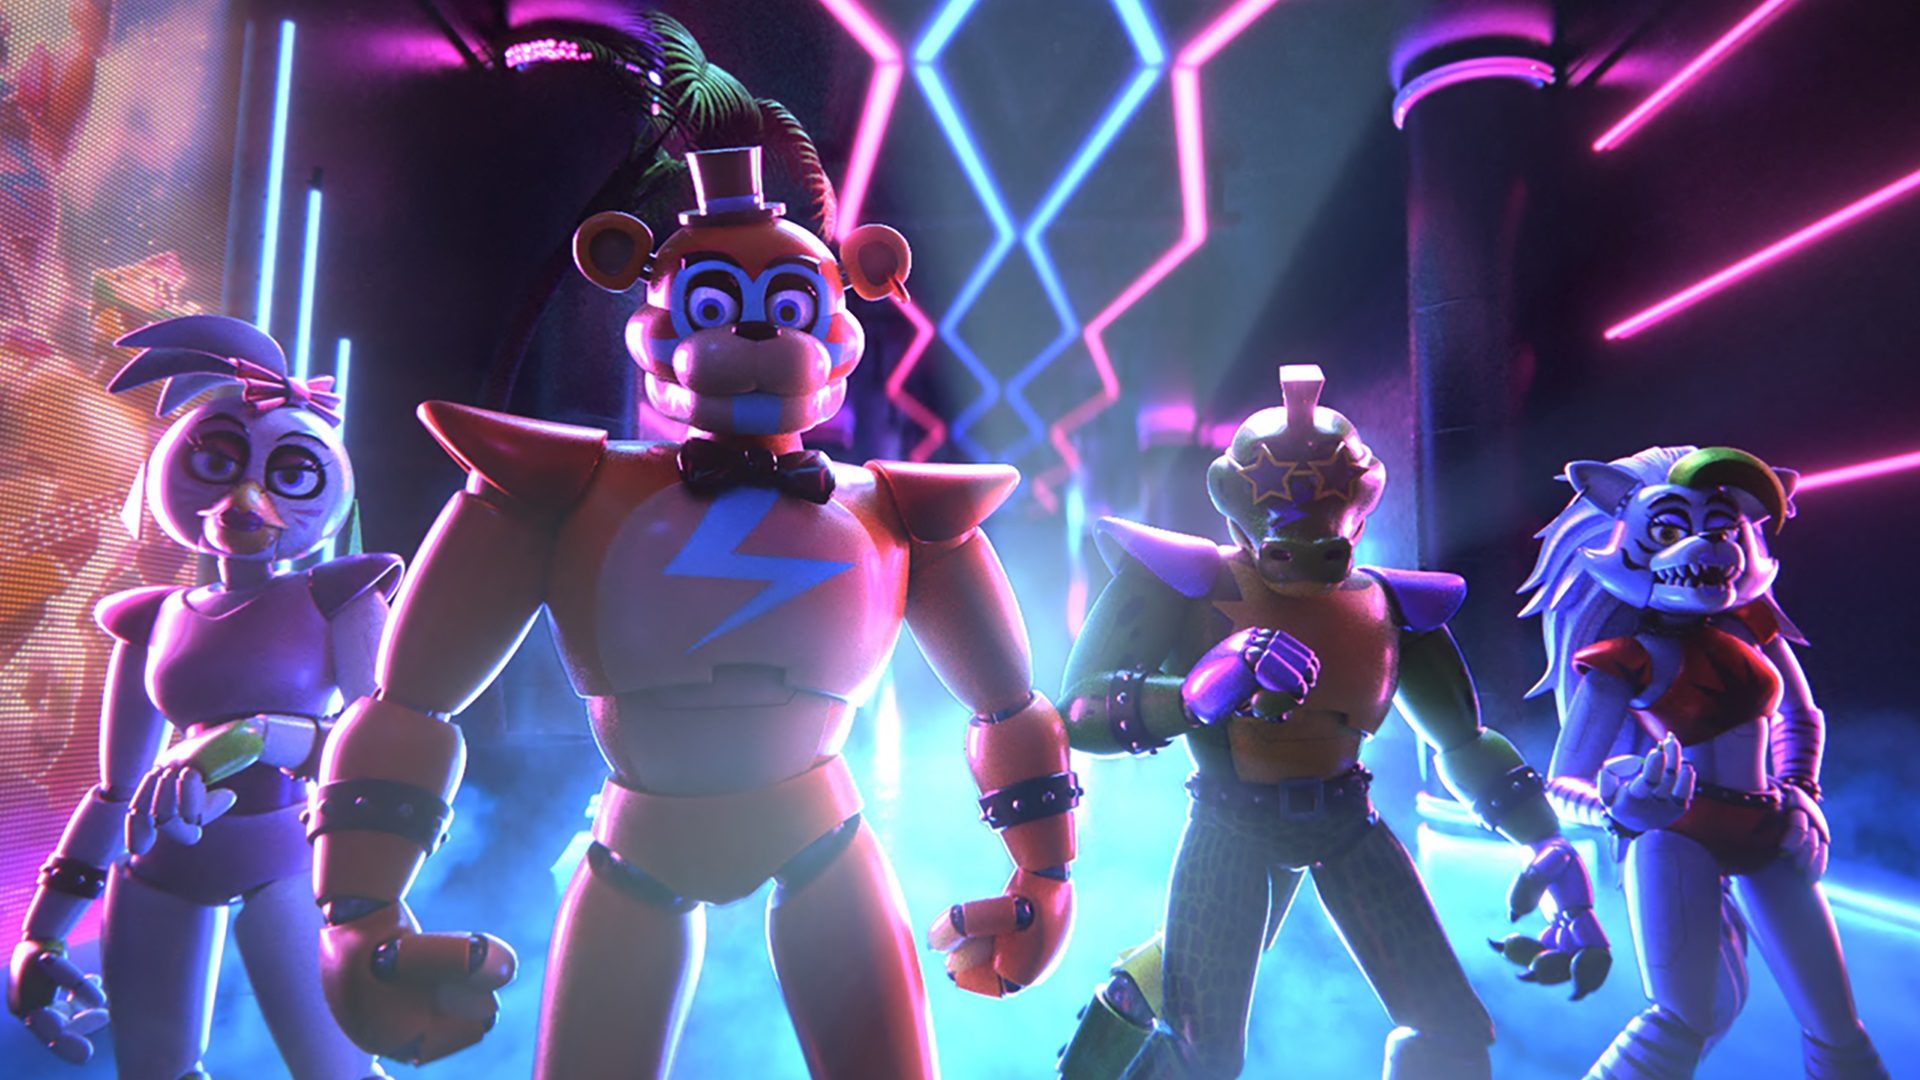 New Five Nights at Freddy's: Security Breach gameplay revealed